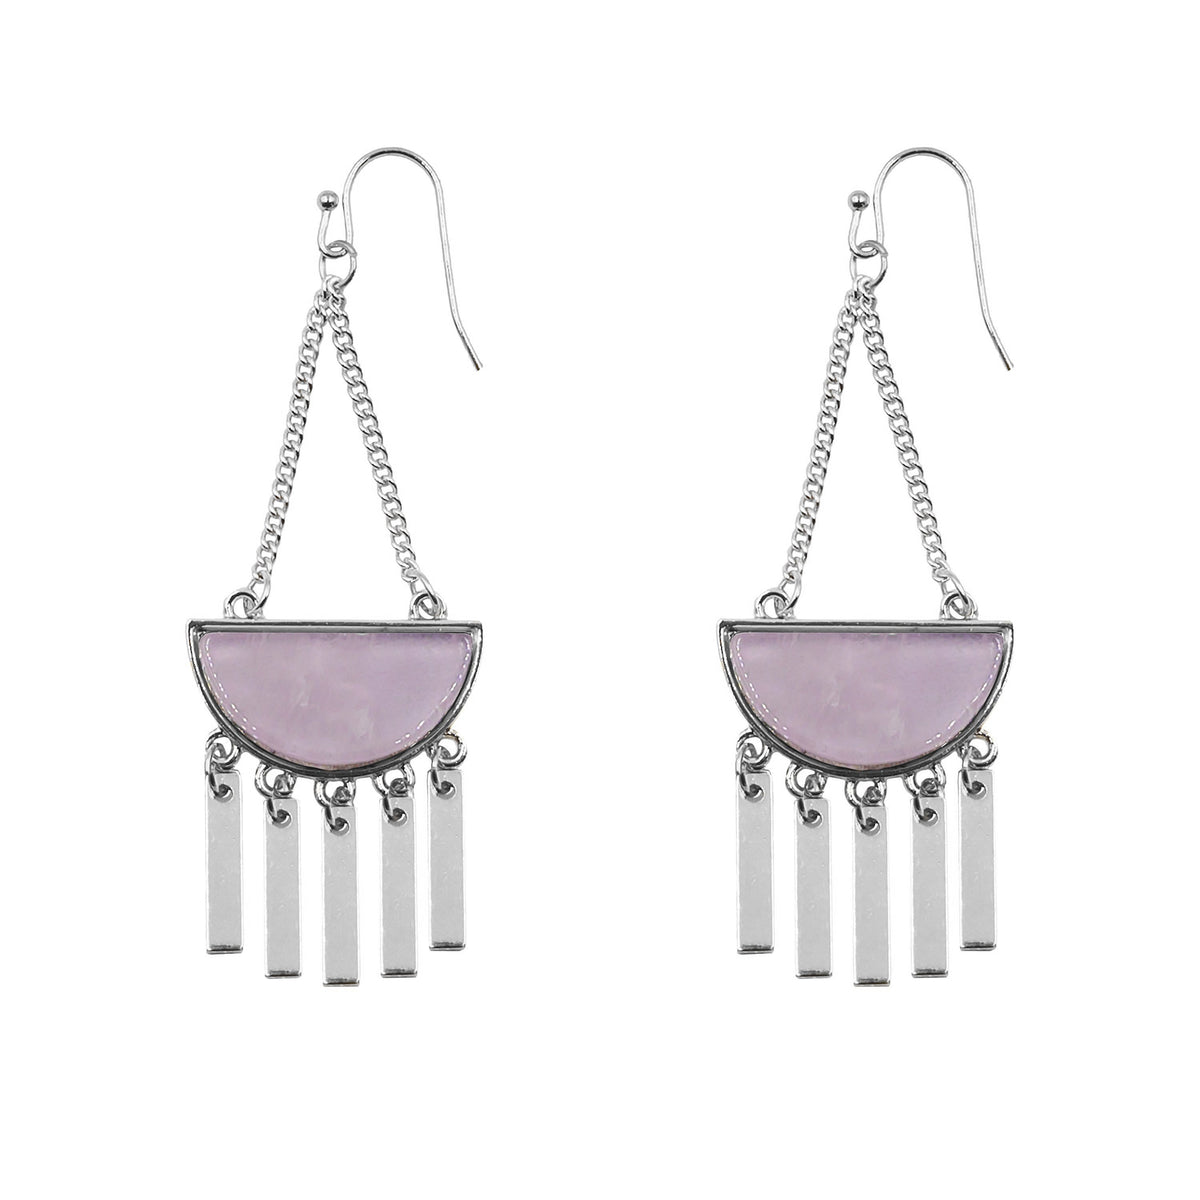 Bianca Collection - Silver Lilac Earrings (Limited Edition) fine designer jewelry for men and women